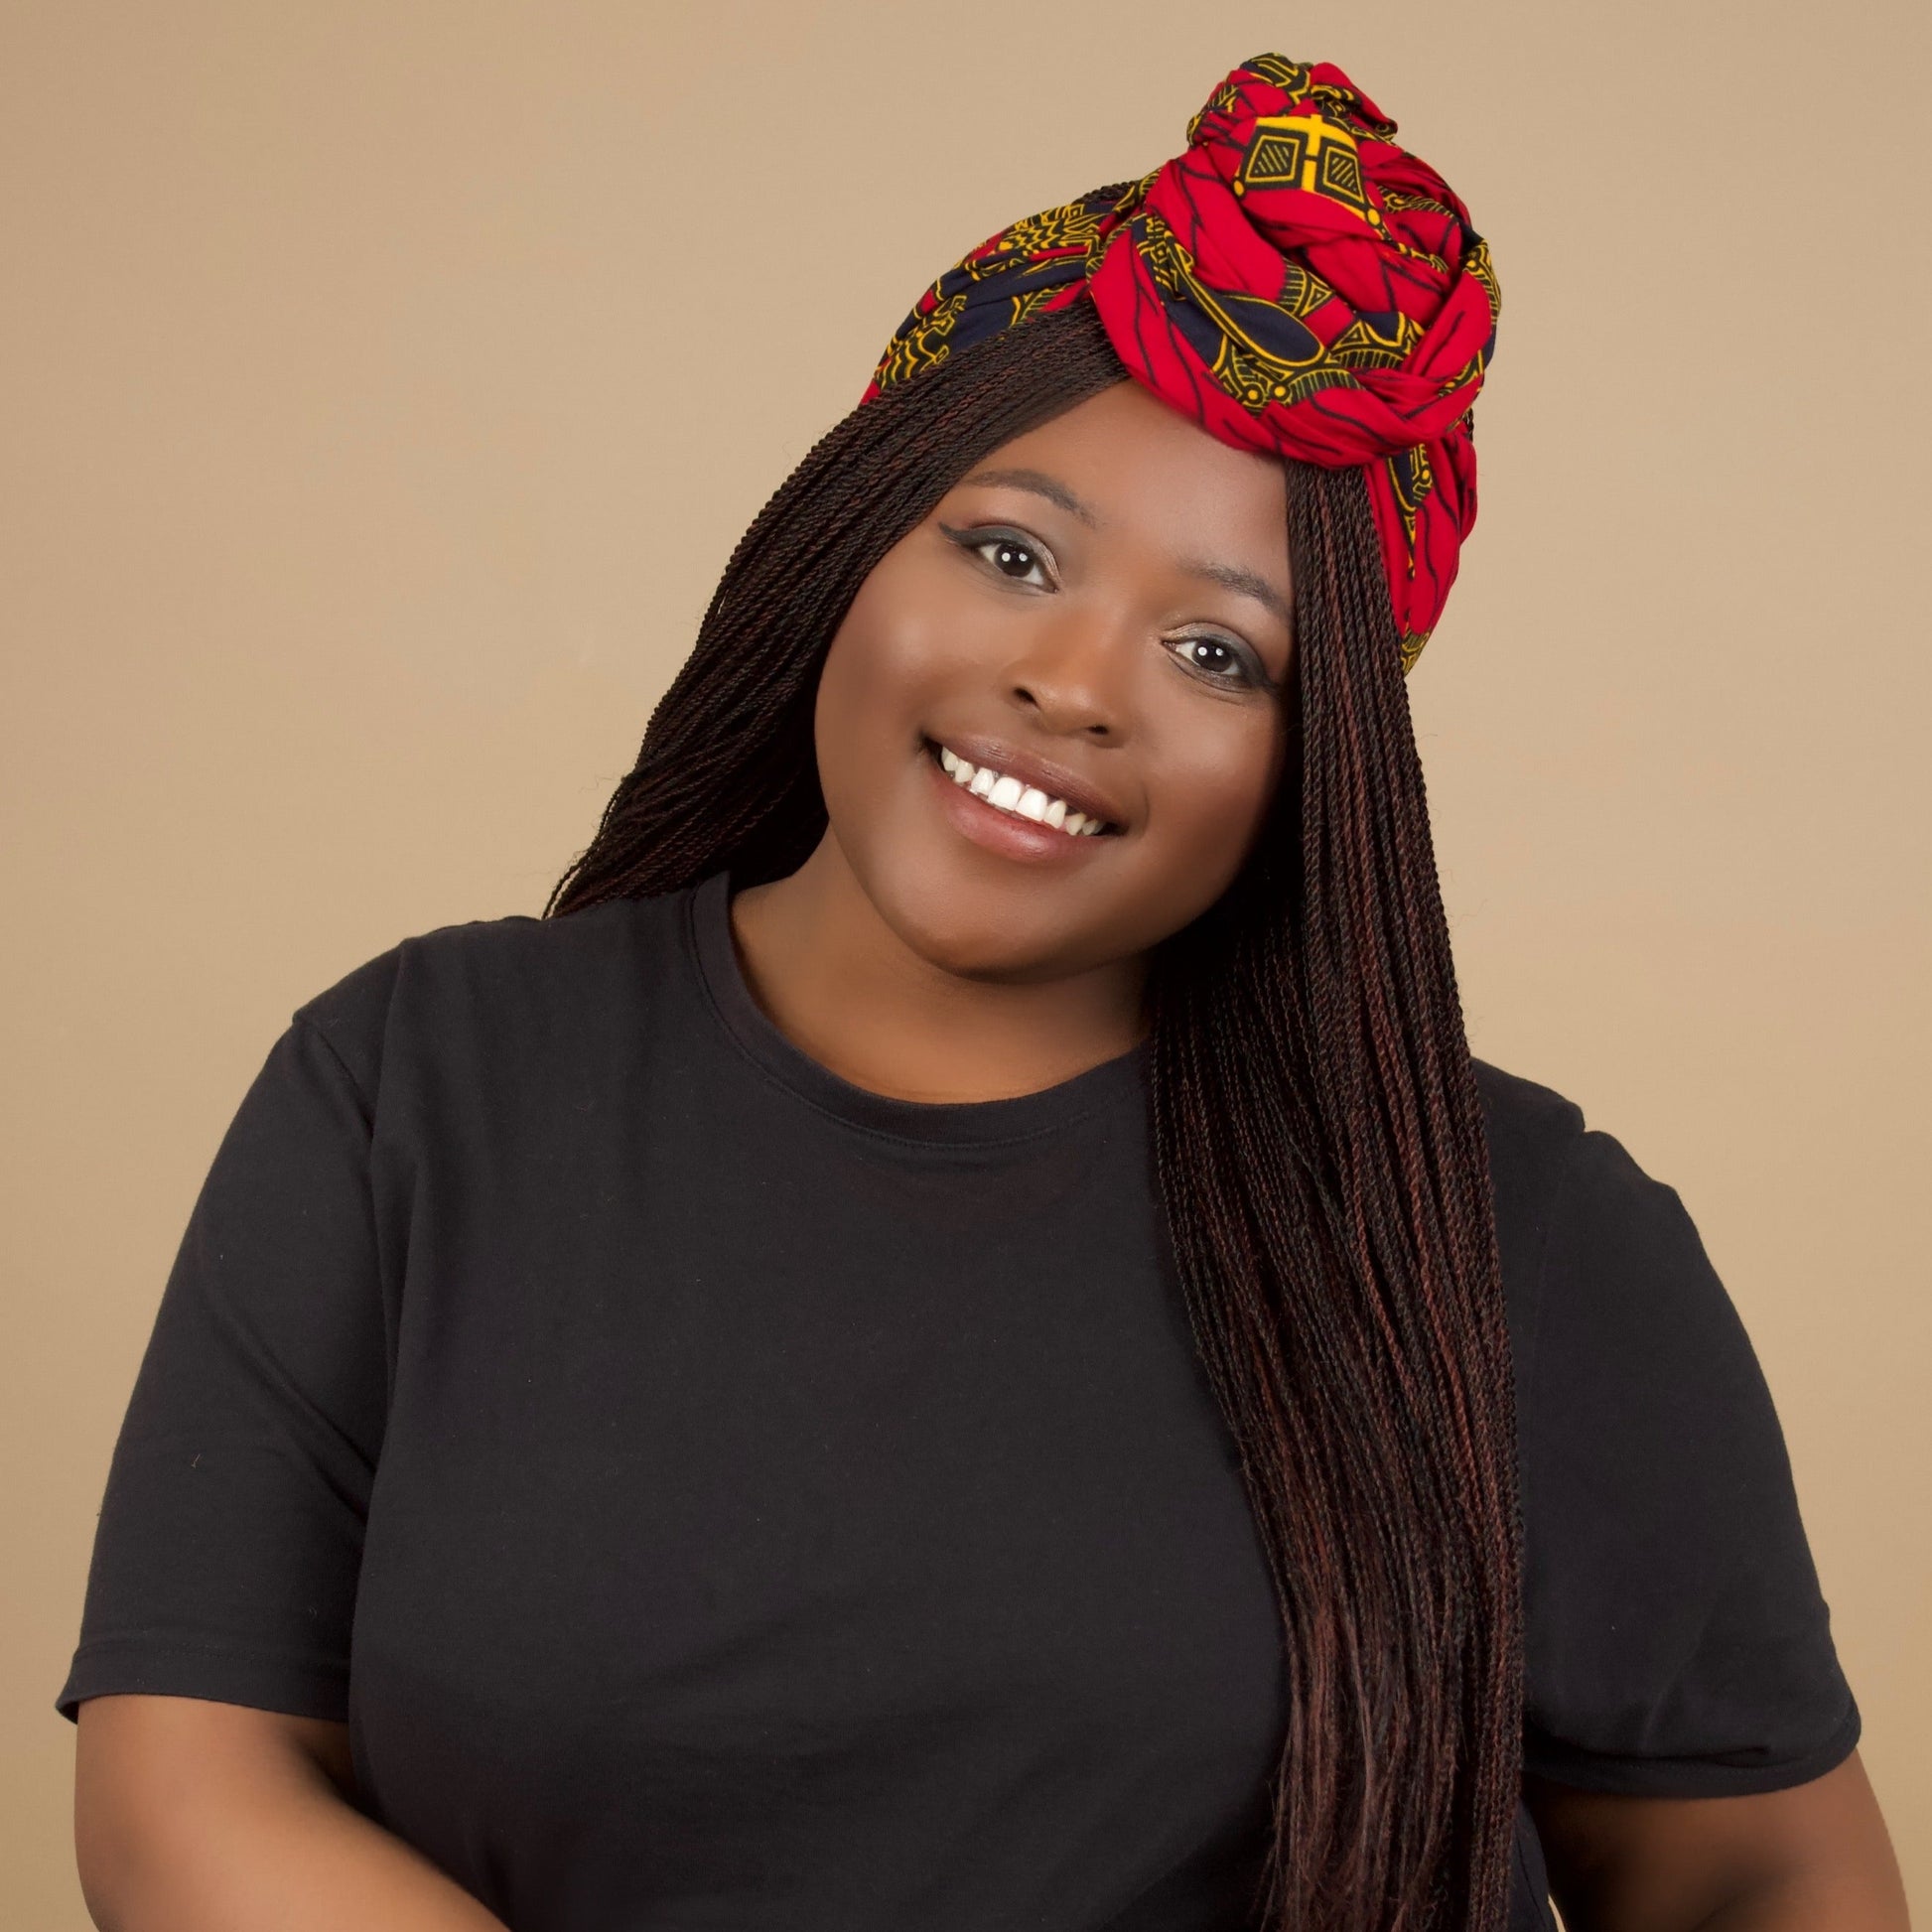 The Jalingo African Print Ankara Head Wrap is a lightweight African Print hair accessory made from ethically produced cotton. The Ankara wax print is a gorgeous red, yellow and black pattern. Designed in England Made in Nigeria.